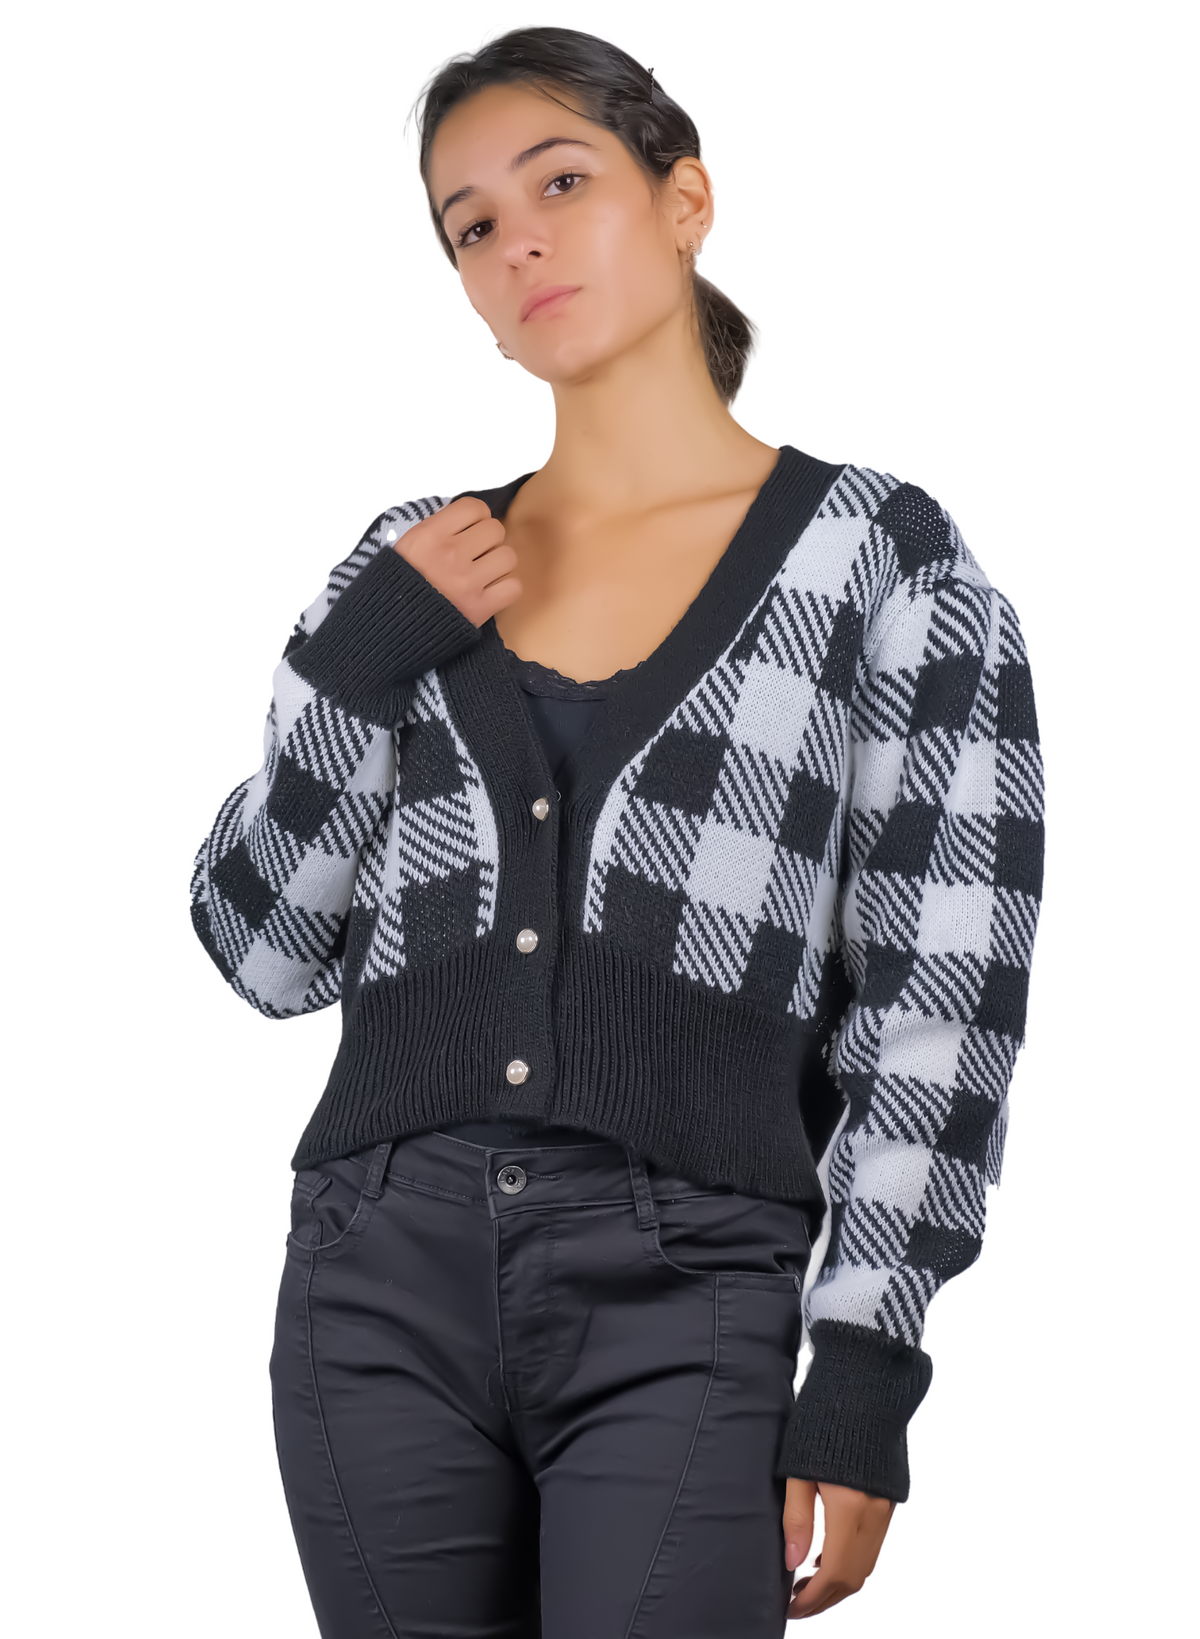 Chess women's cardigan with buttons